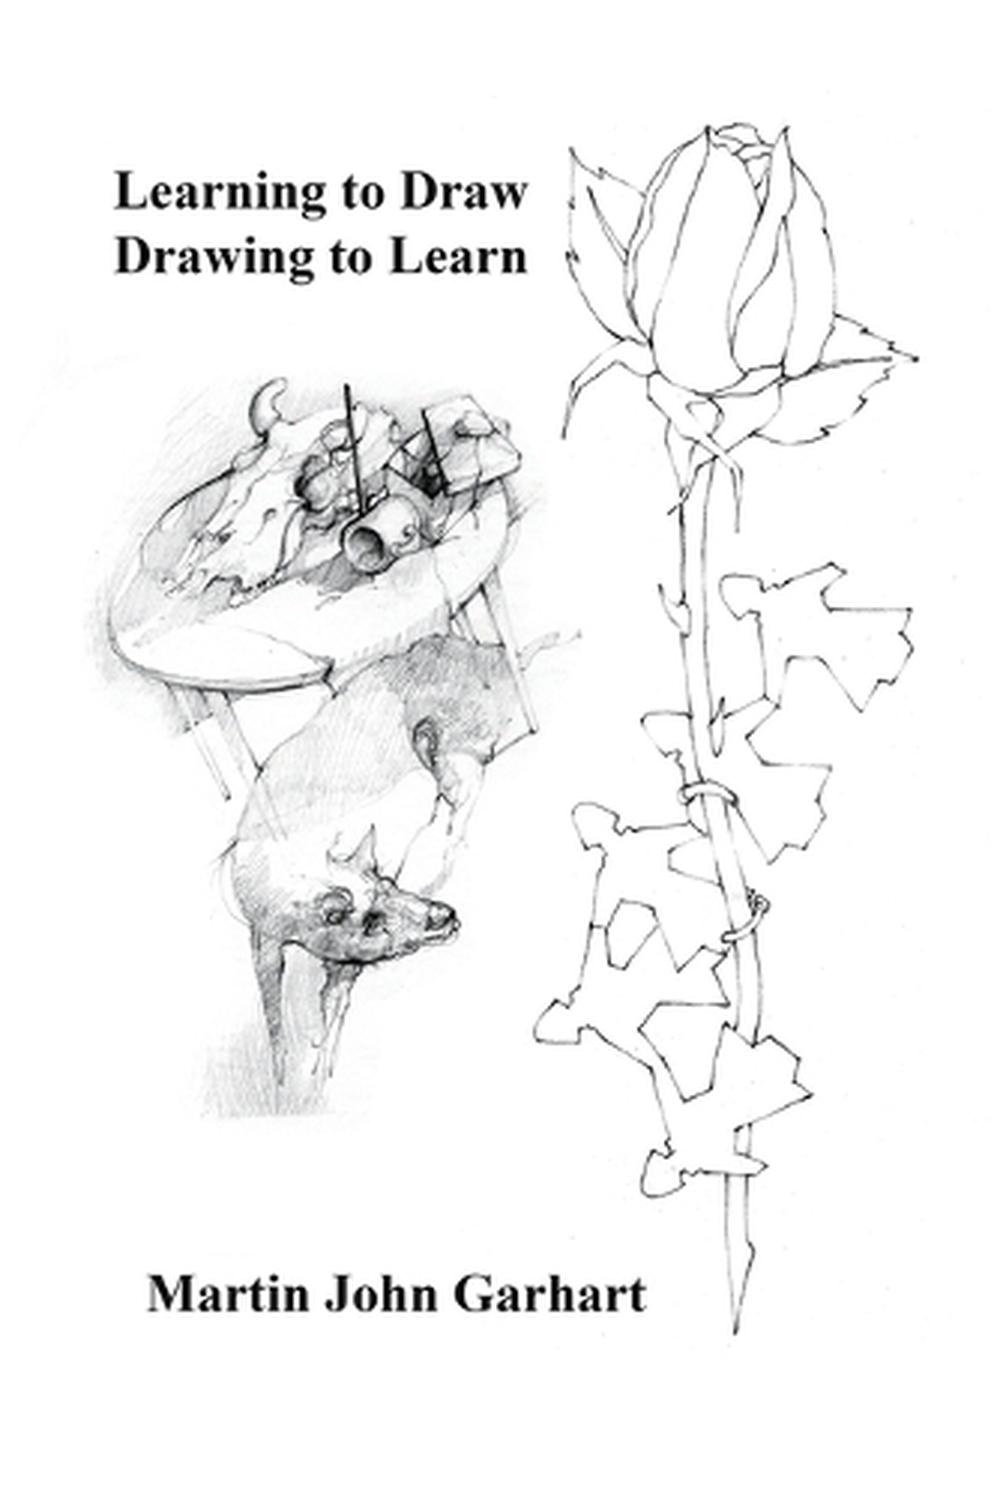 Learning to Draw Drawing to Learn by Martin John Garhart